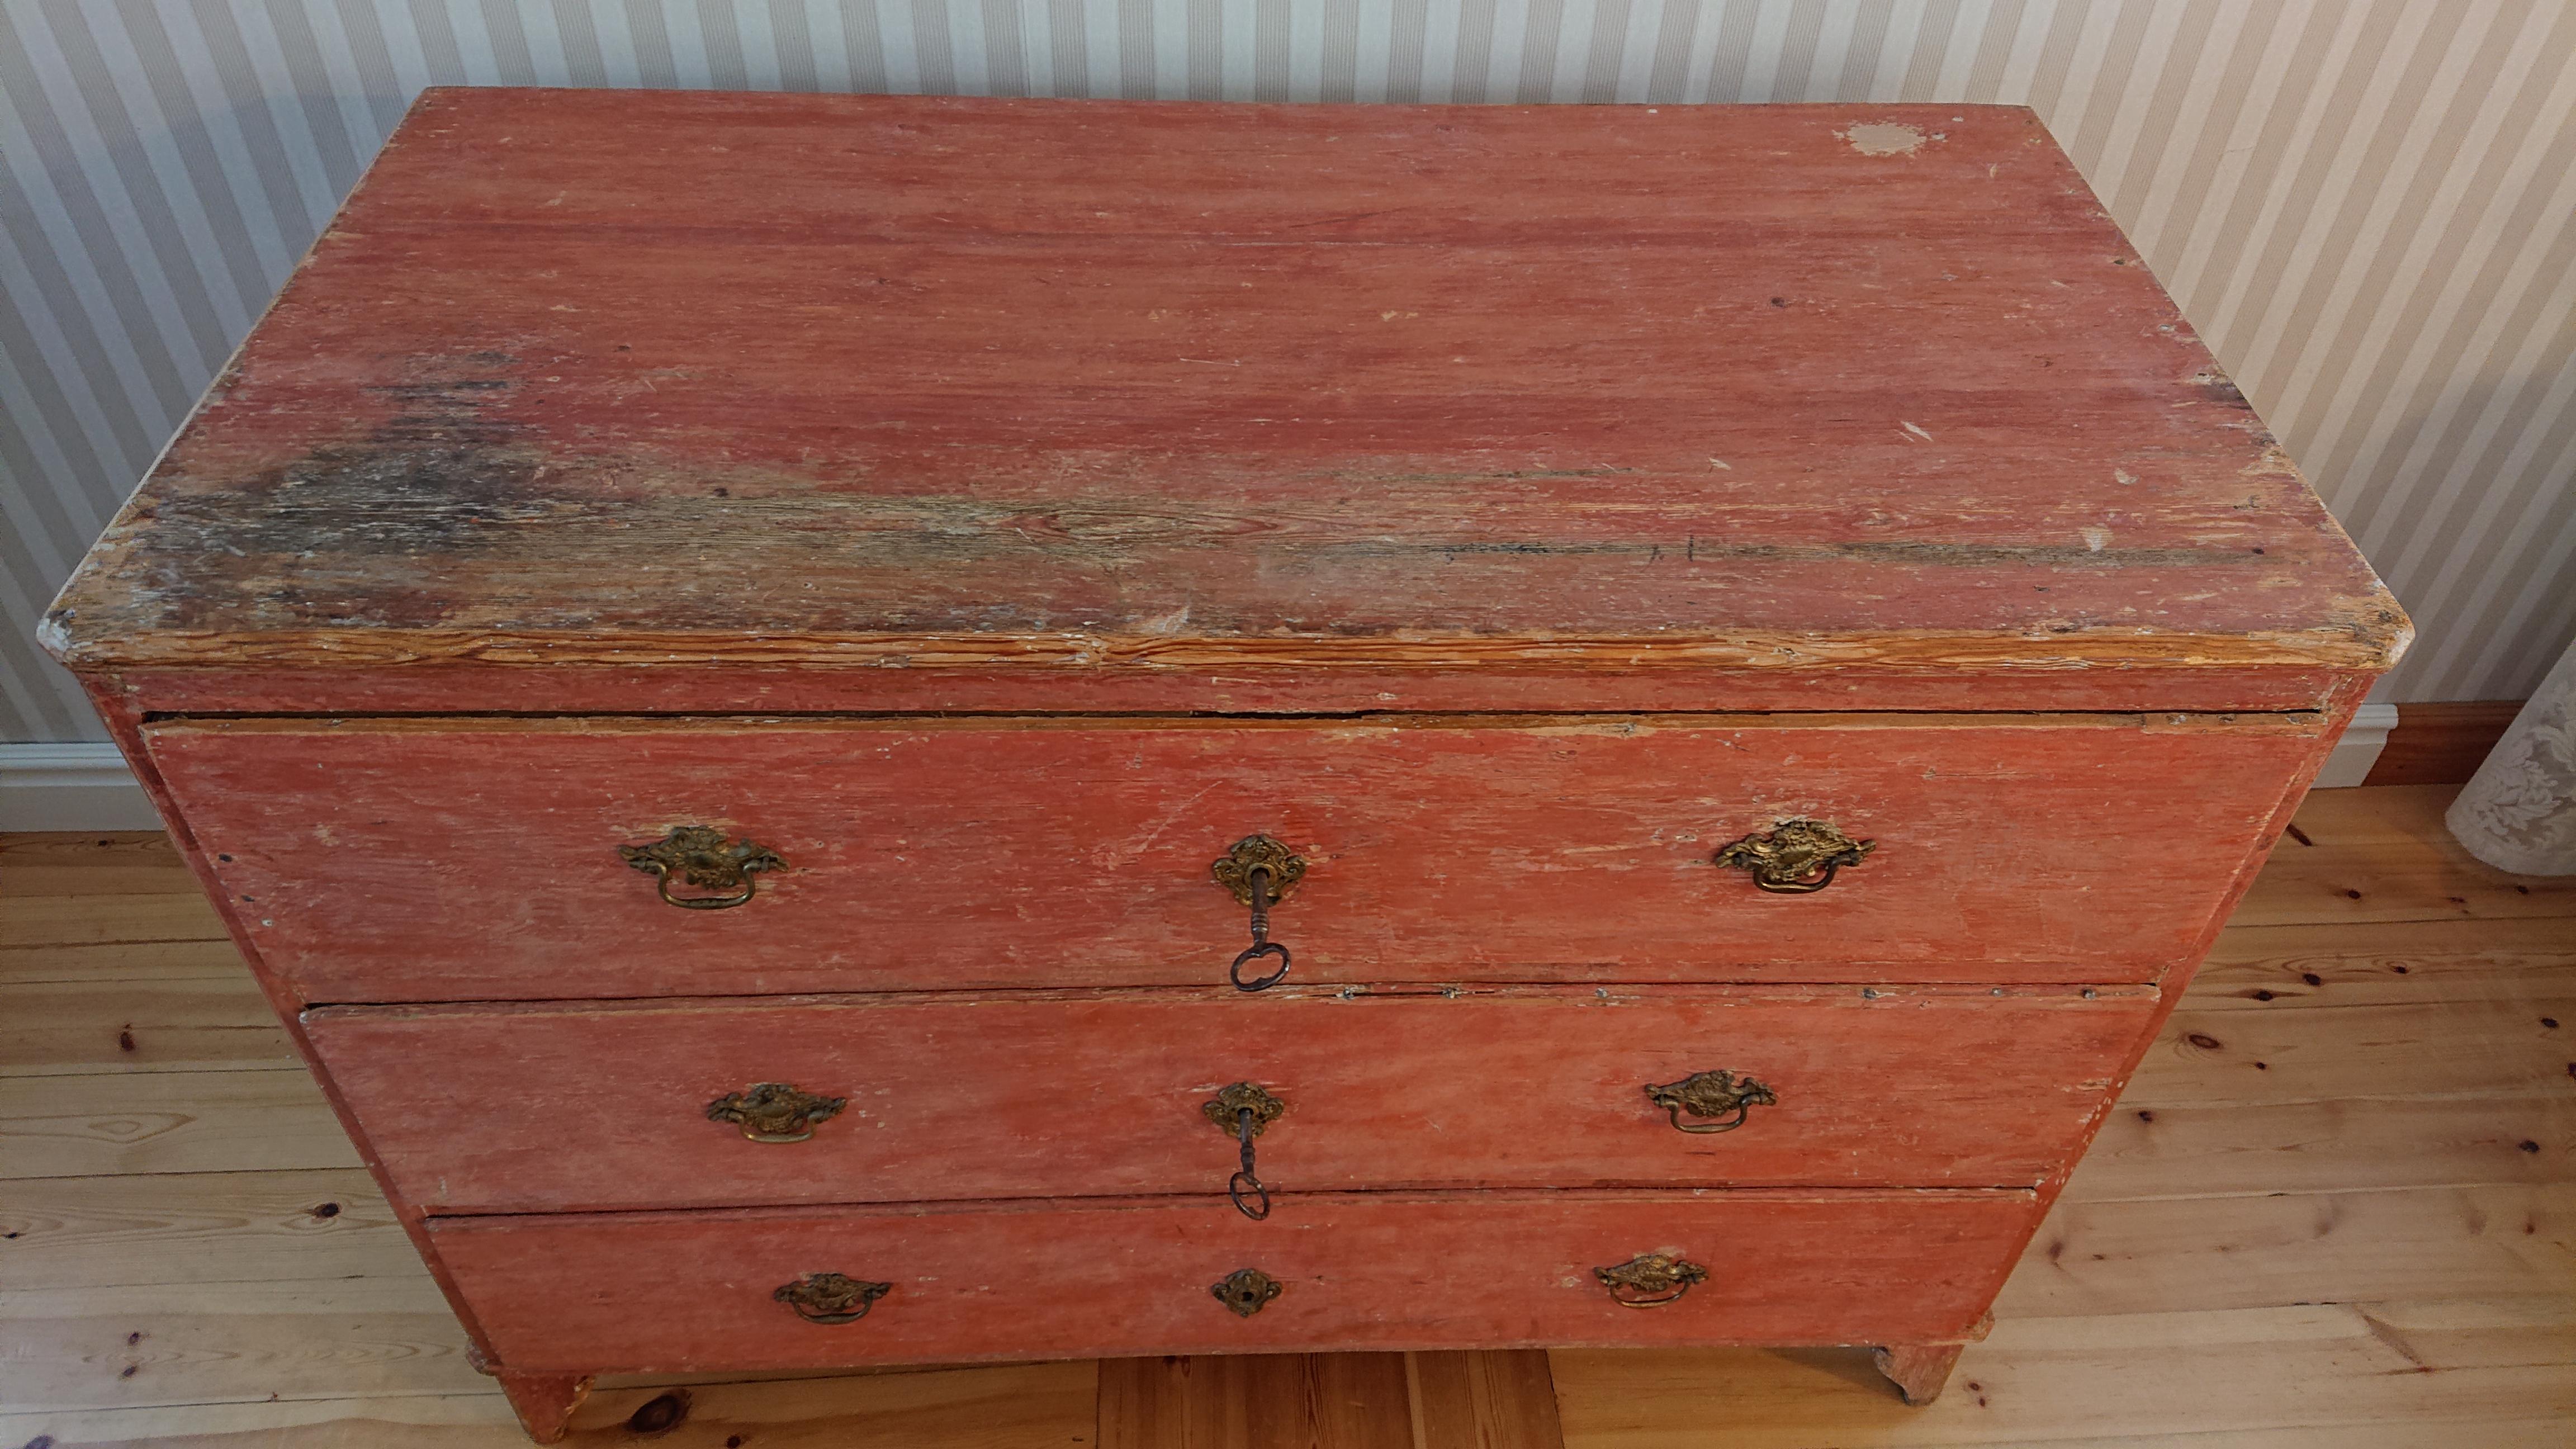 18th century Late Baroque chest of drawers from Piteå Norrbotten, Northern Sweden. 
Carefully hand-scraped to its original color. Fine proportions, nicely shaped legs.
The top drawer has wood repair at the top right.
The middle drawer has wood